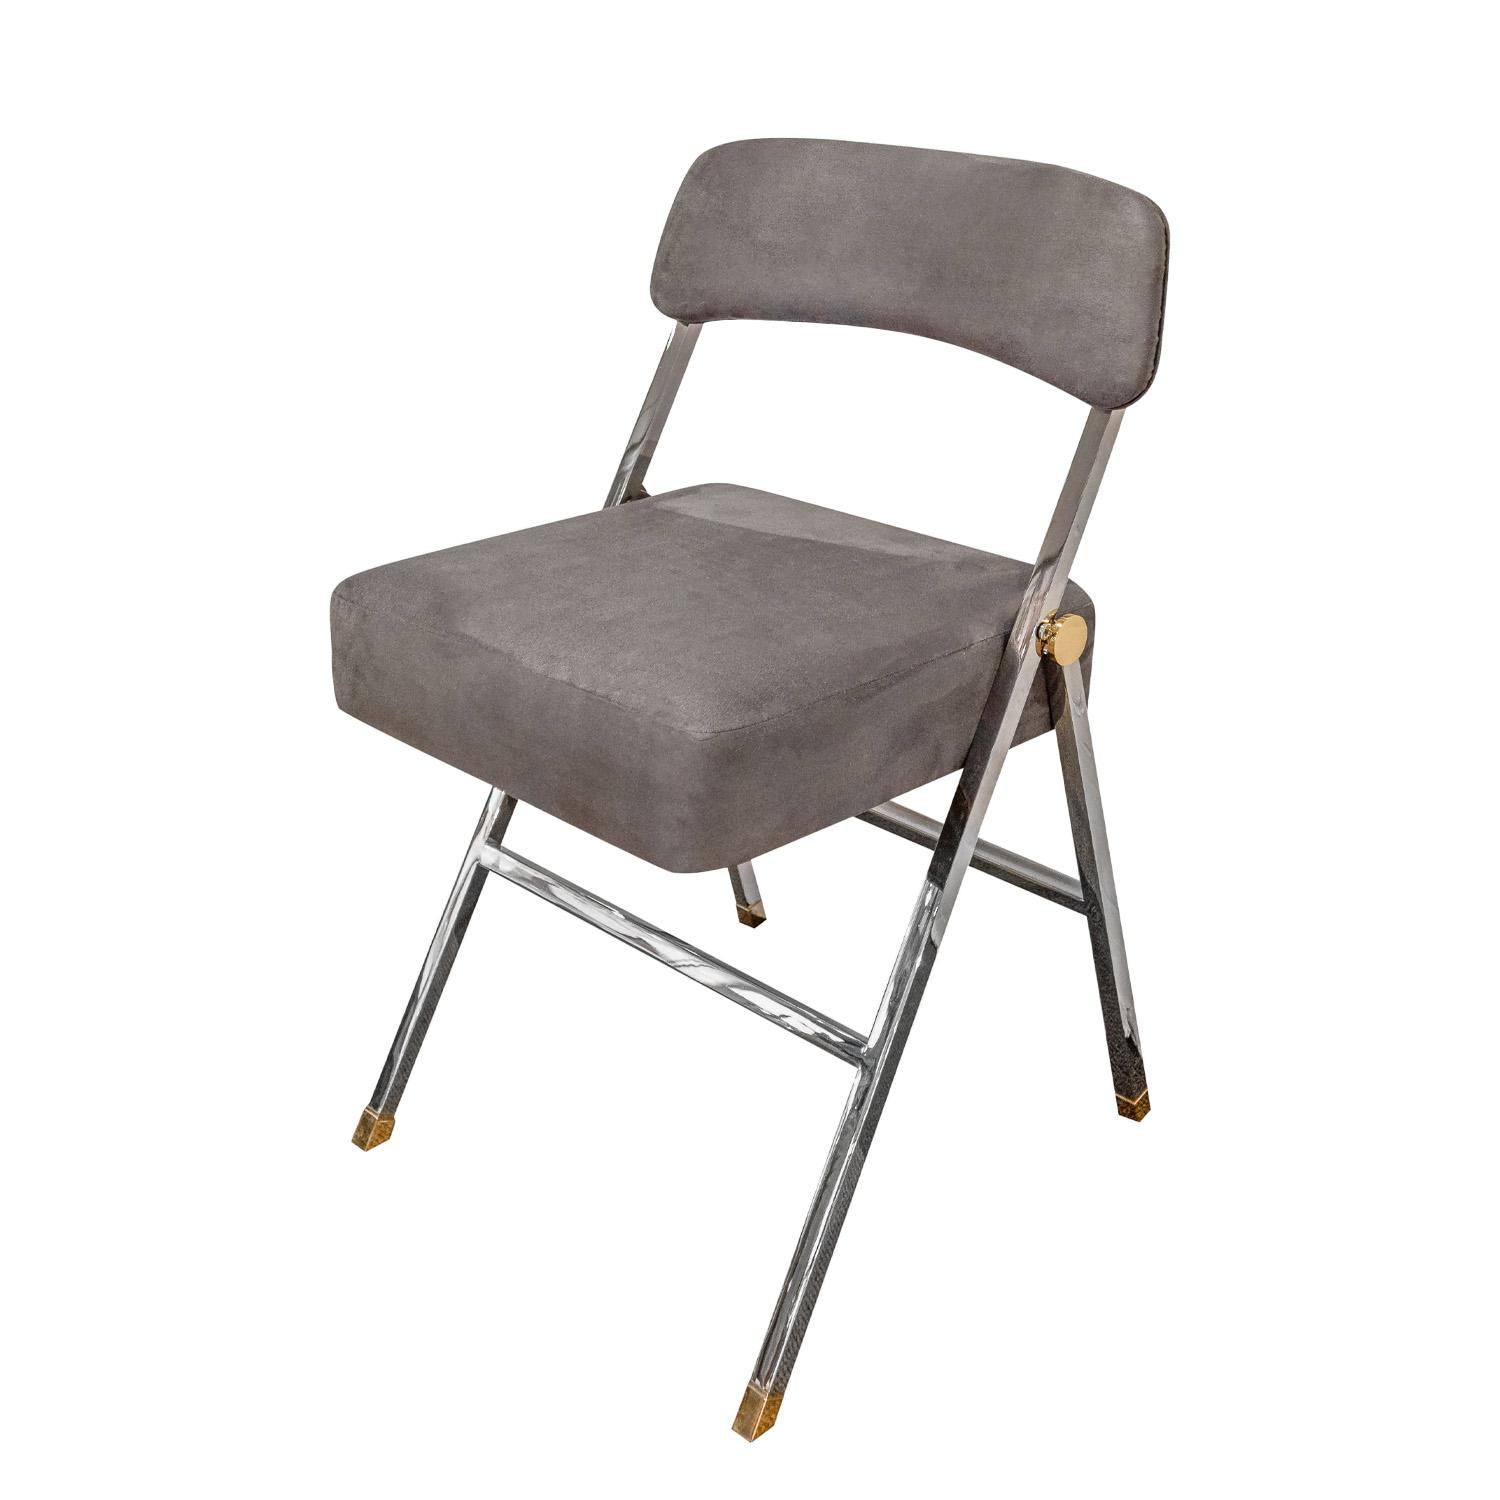 Chair, beautifully crafted in polished brass and chrome with upholstered seat and back, by Karl Springer, American 1980's.  Metal has been professionally polished and lacquered and chair has been newly reupholstered in gray ultrasuede by Lobel